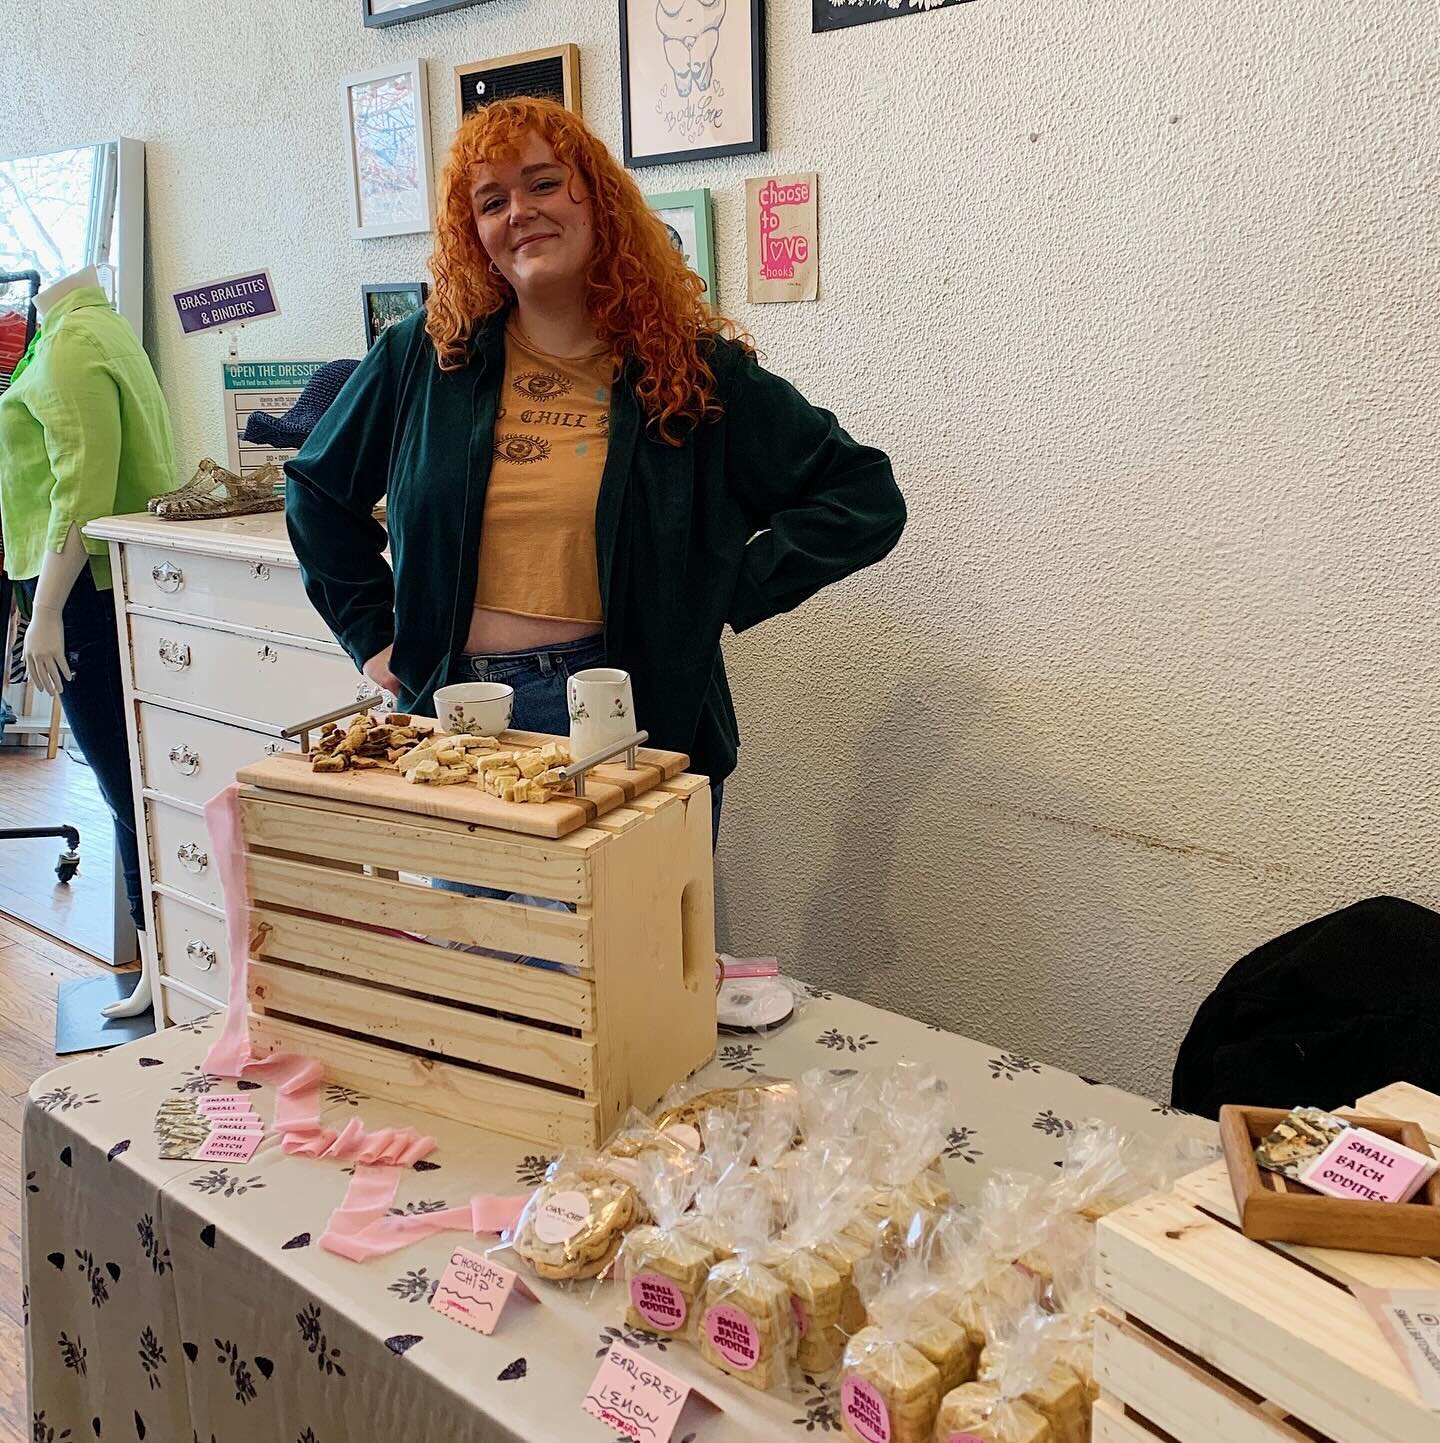 Thank you so much @smallbatchoddities for coming through this weekend and sharing your treats with us! Make sure to follow and support them 🍪✨

We were bummed that @mx.cassandra.snow couldn't join us on Sunday as planned because of the weather but t